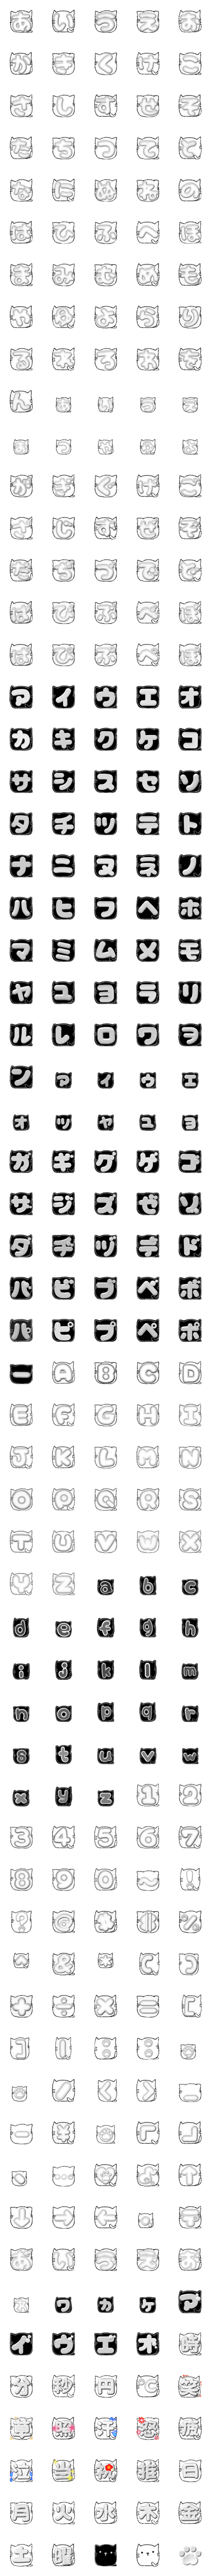 [LINE絵文字]ぷくにゃお＜モノクロ＞デコ文字の画像一覧